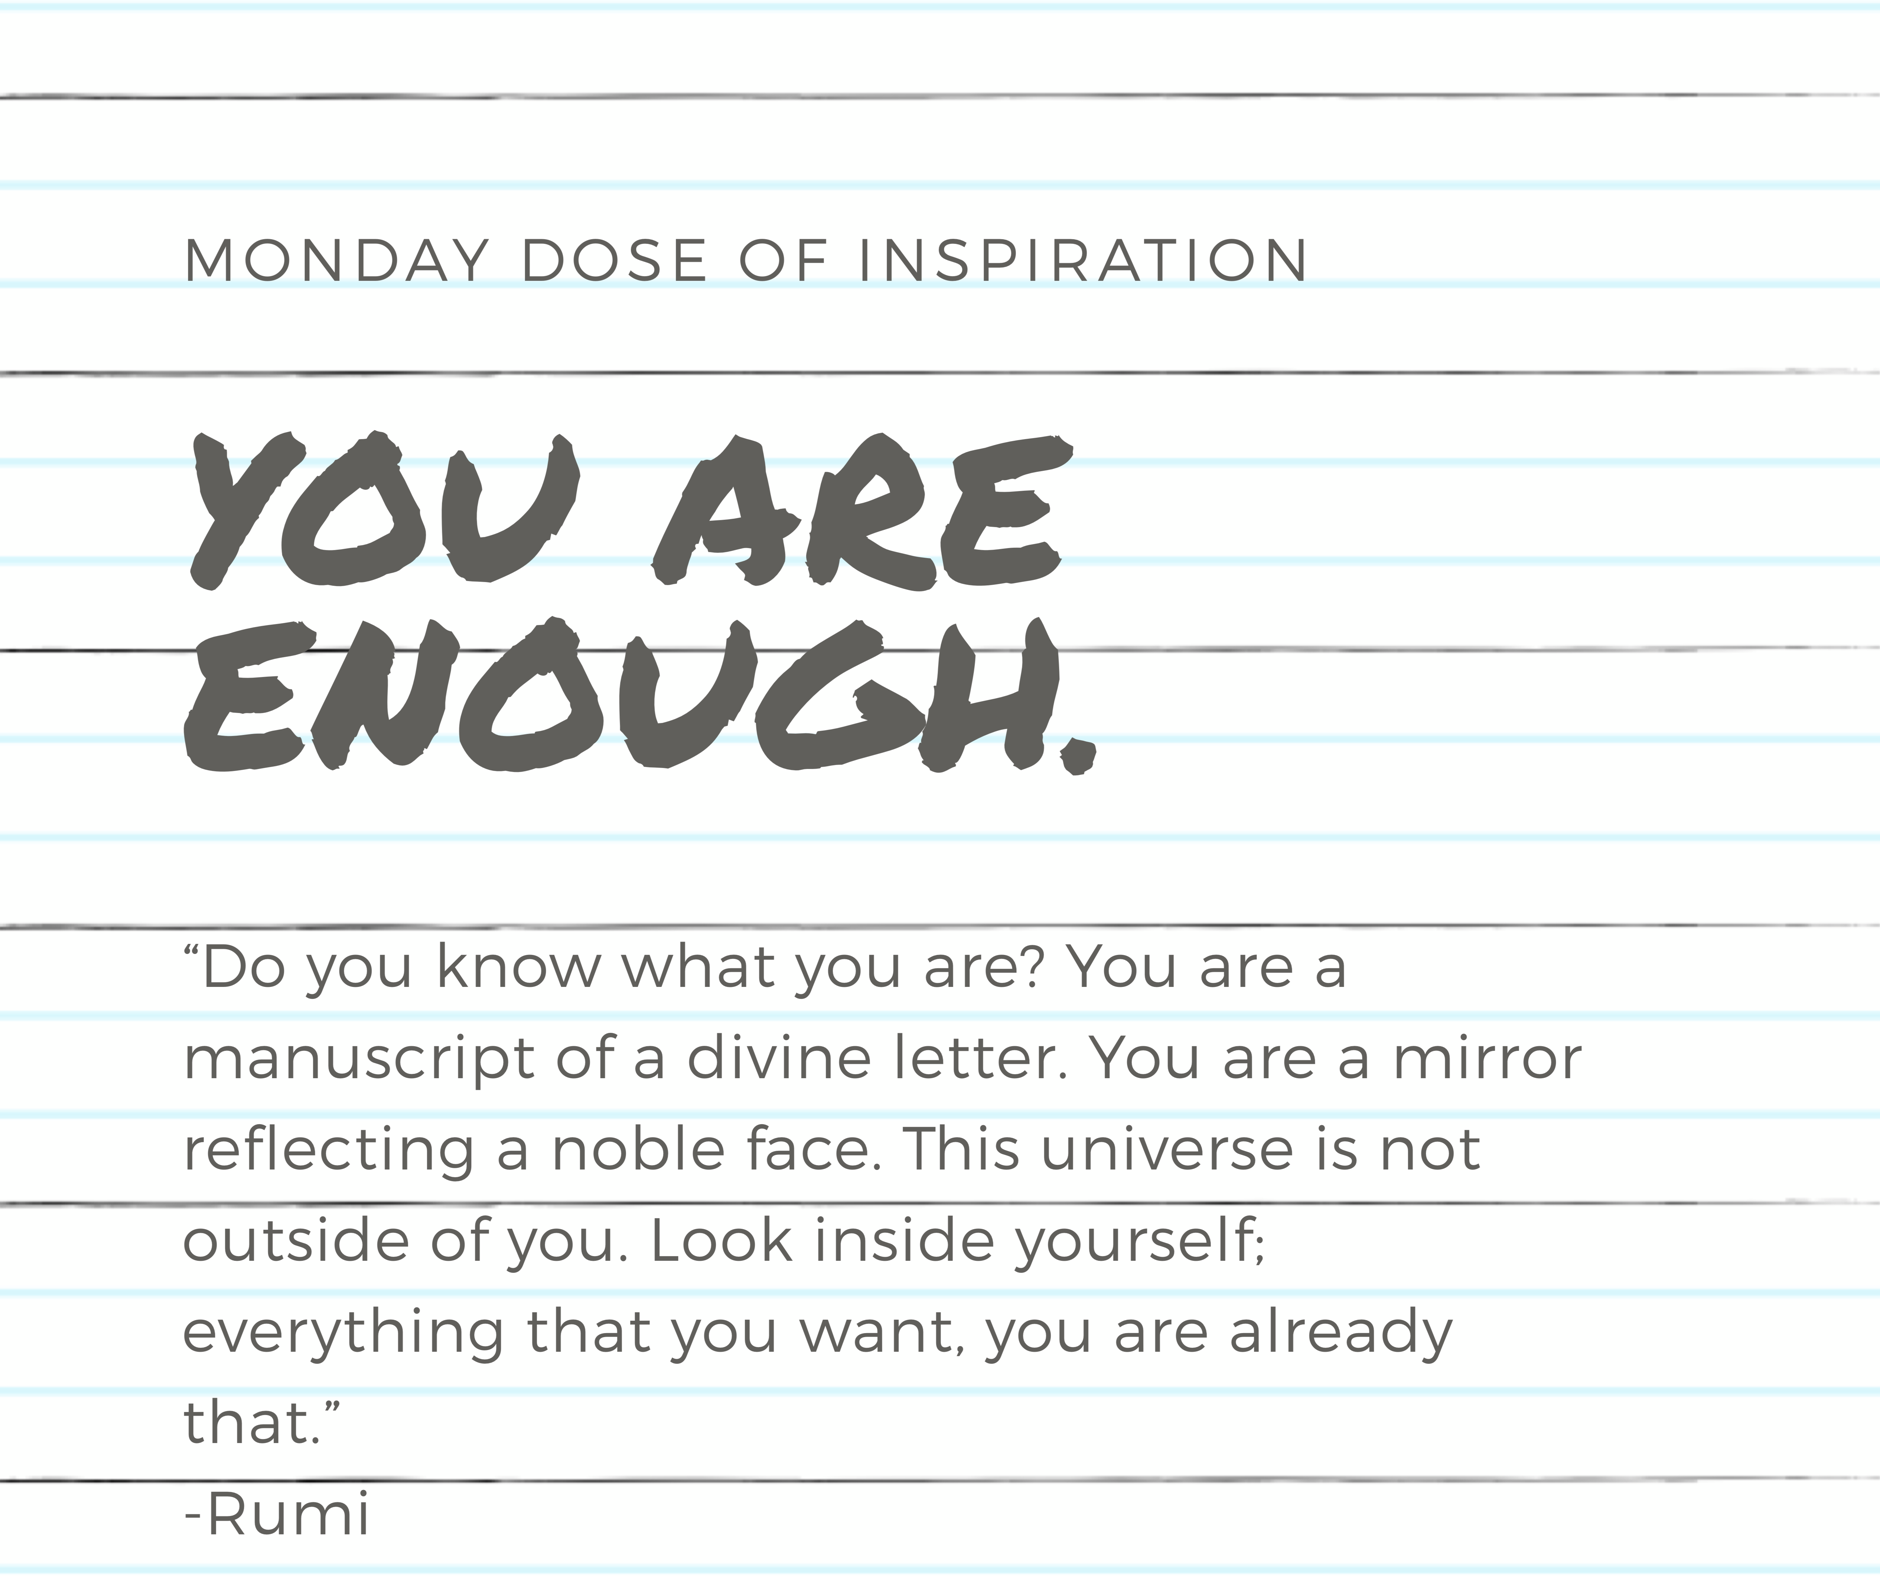 Monday Dose of Inspiration - You Are Enough